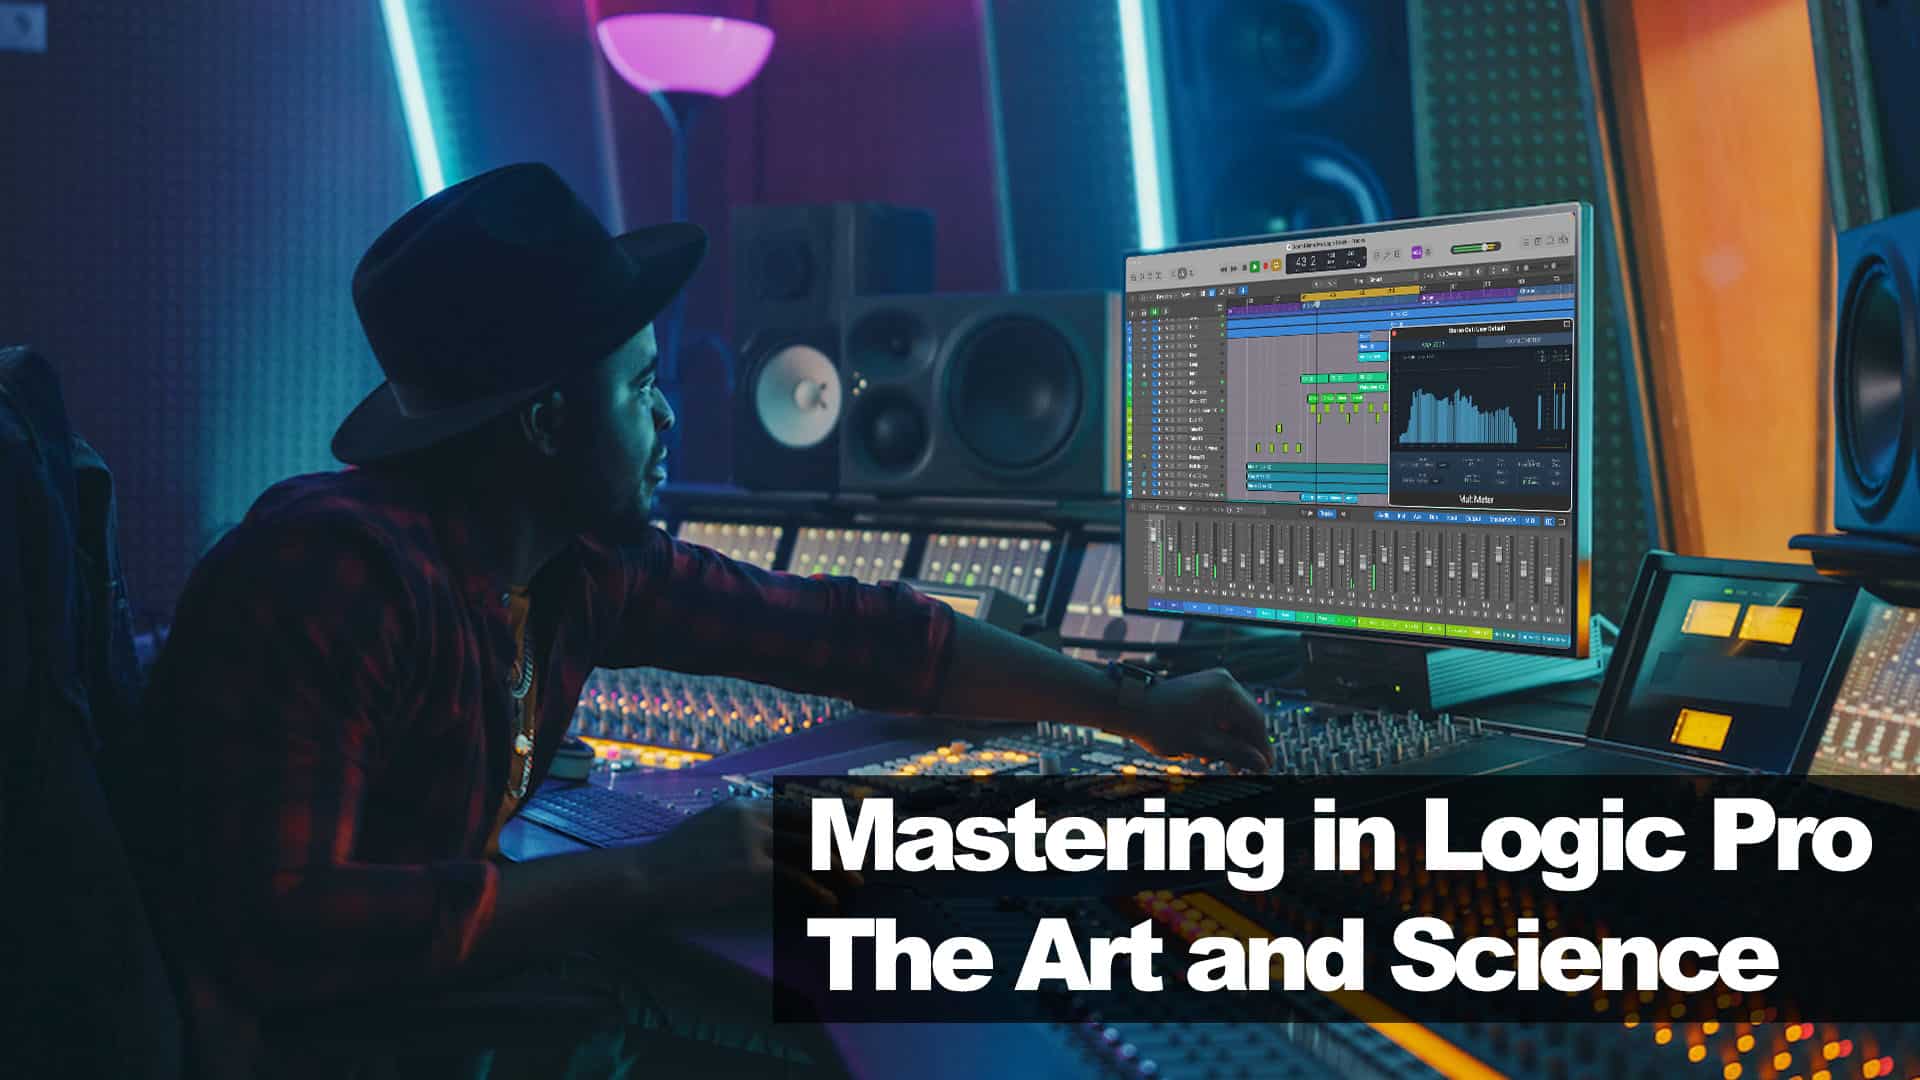 mastering in logic pro x, mixing and mastering in logic pro x, mastering plugins logic pro x, mastering with logic pro x stock plugins, free mastering plugins logic pro x, logic pro x master compressor, mastering tools logic pro x, best mastering plugins logic pro x, mastering a track in logic pro x,